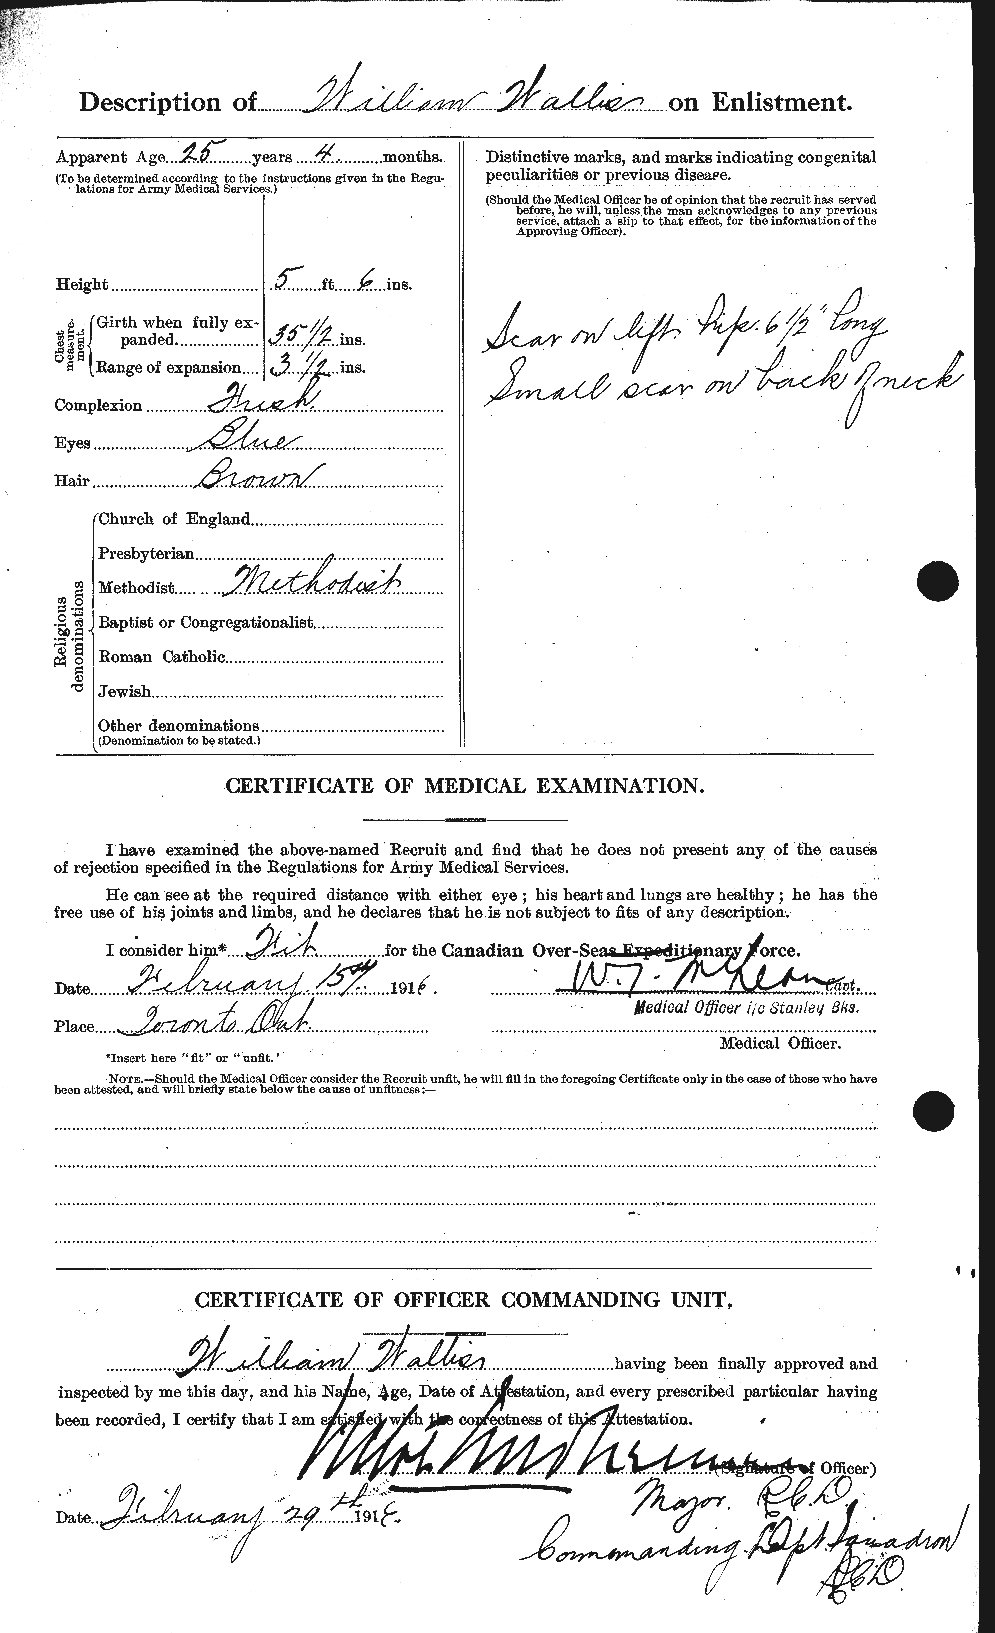 Personnel Records of the First World War - CEF 661038b